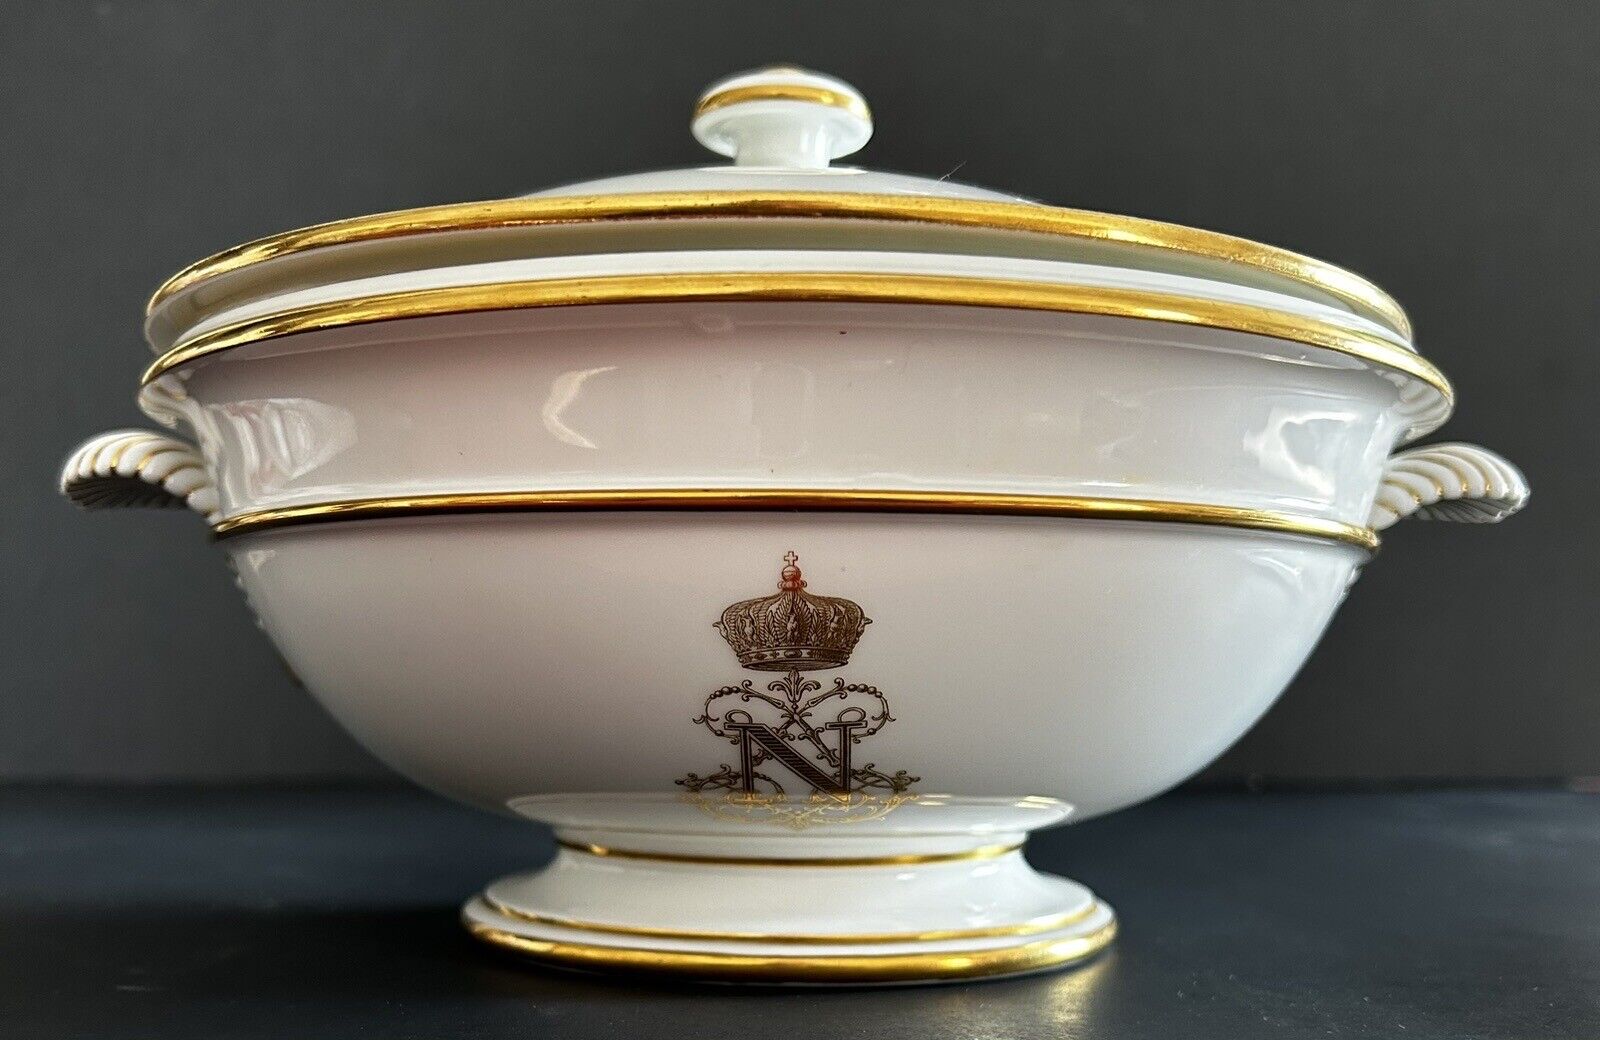 1865 French Sevres Porcelain Napoleon III Compote / Serving Dish with Cover